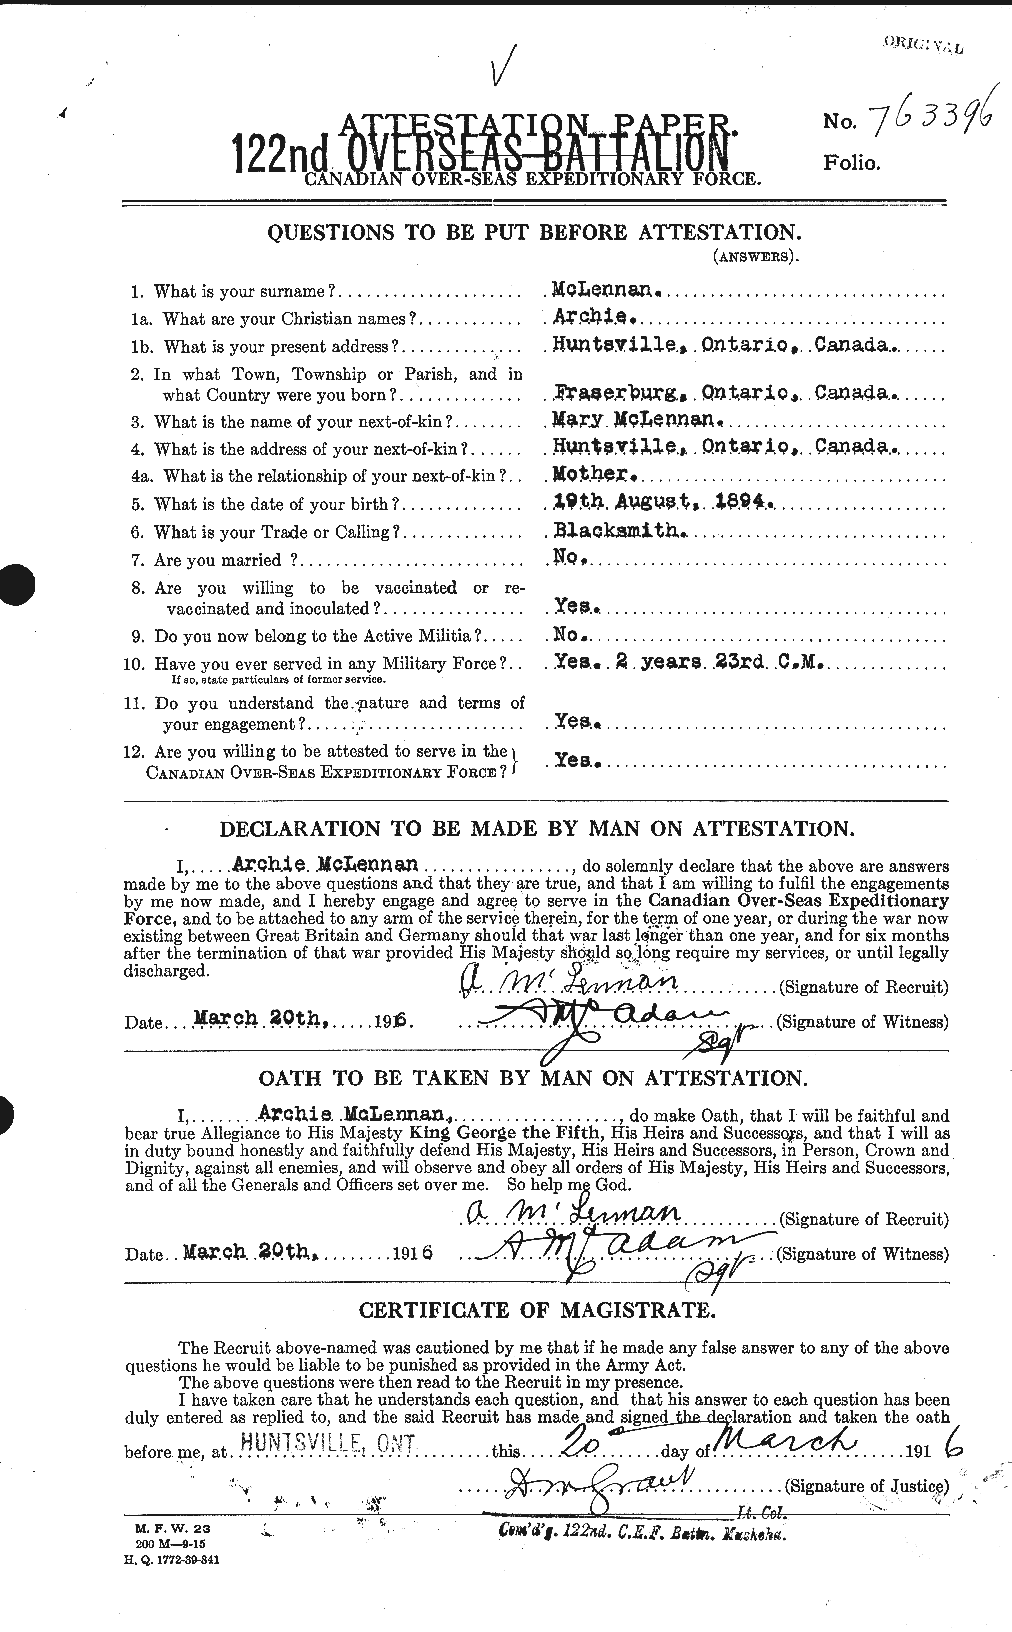 Personnel Records of the First World War - CEF 534421a